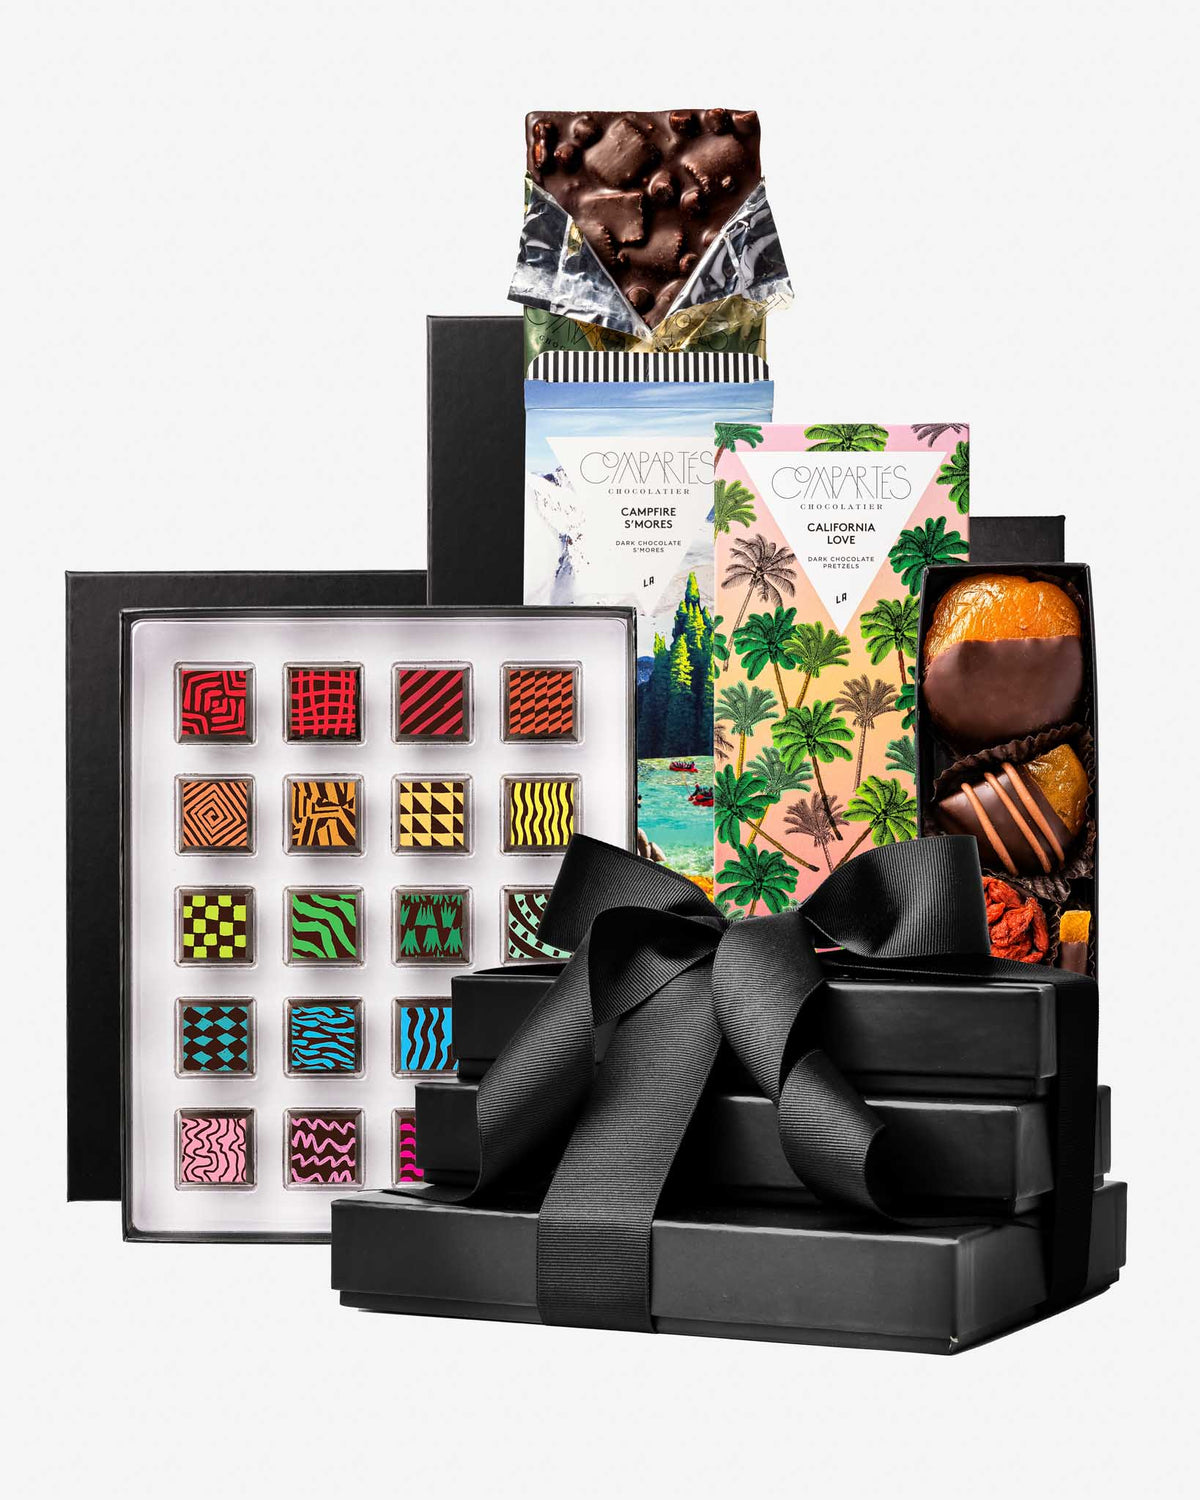 Compartes Signature Chocolate Gift Tower Basket